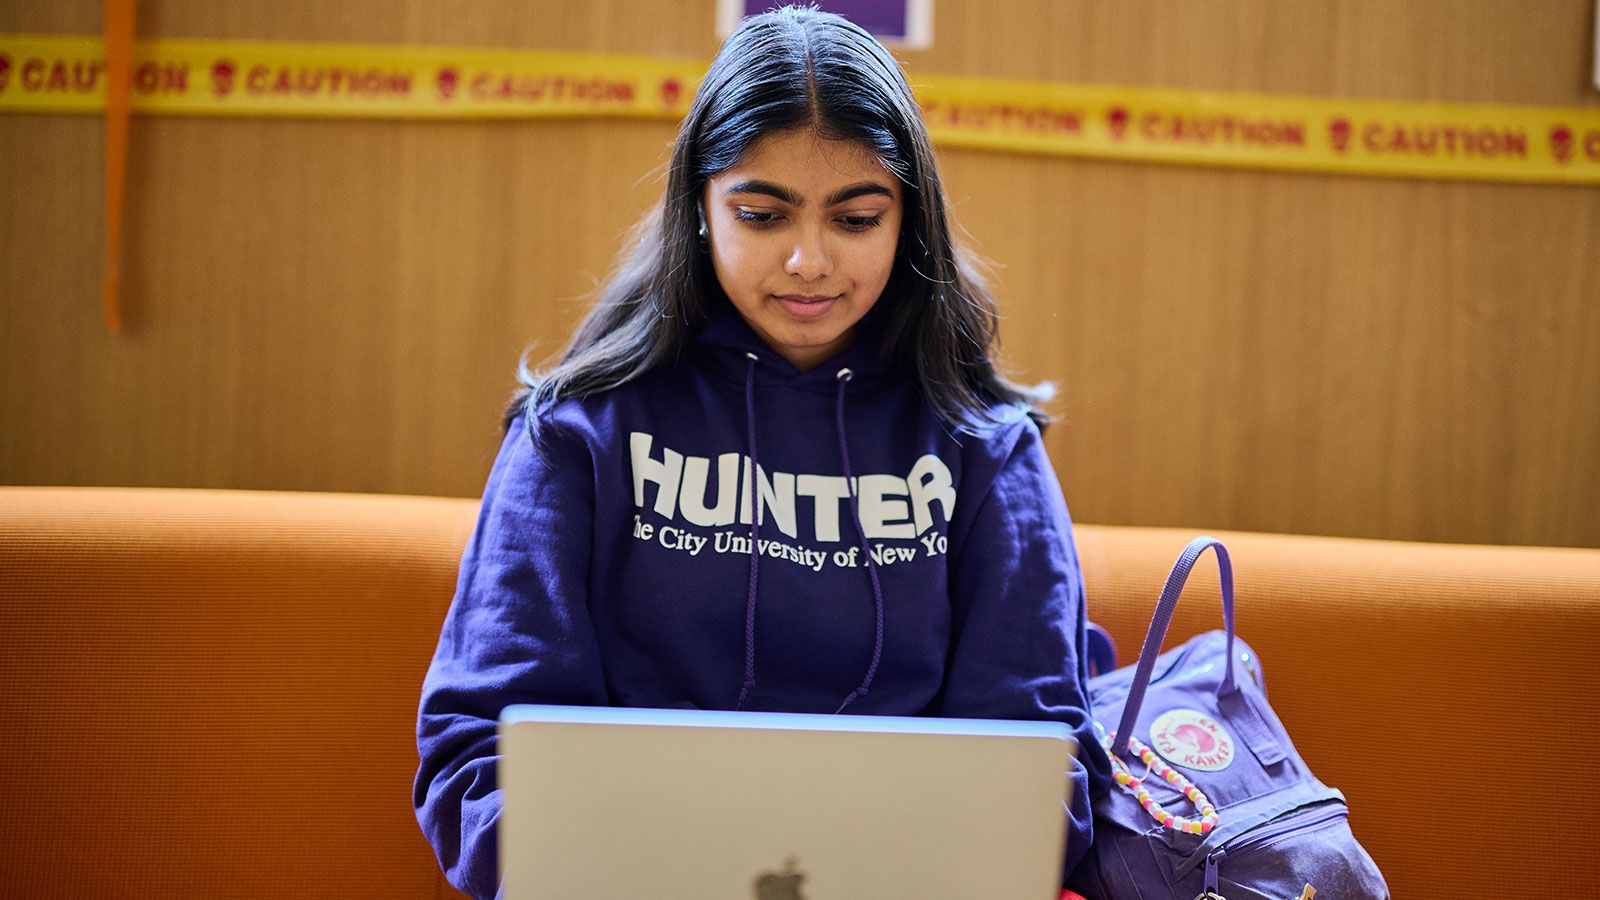 Hunter student wearing CUNY sweatshirt working on laptop in Student Union